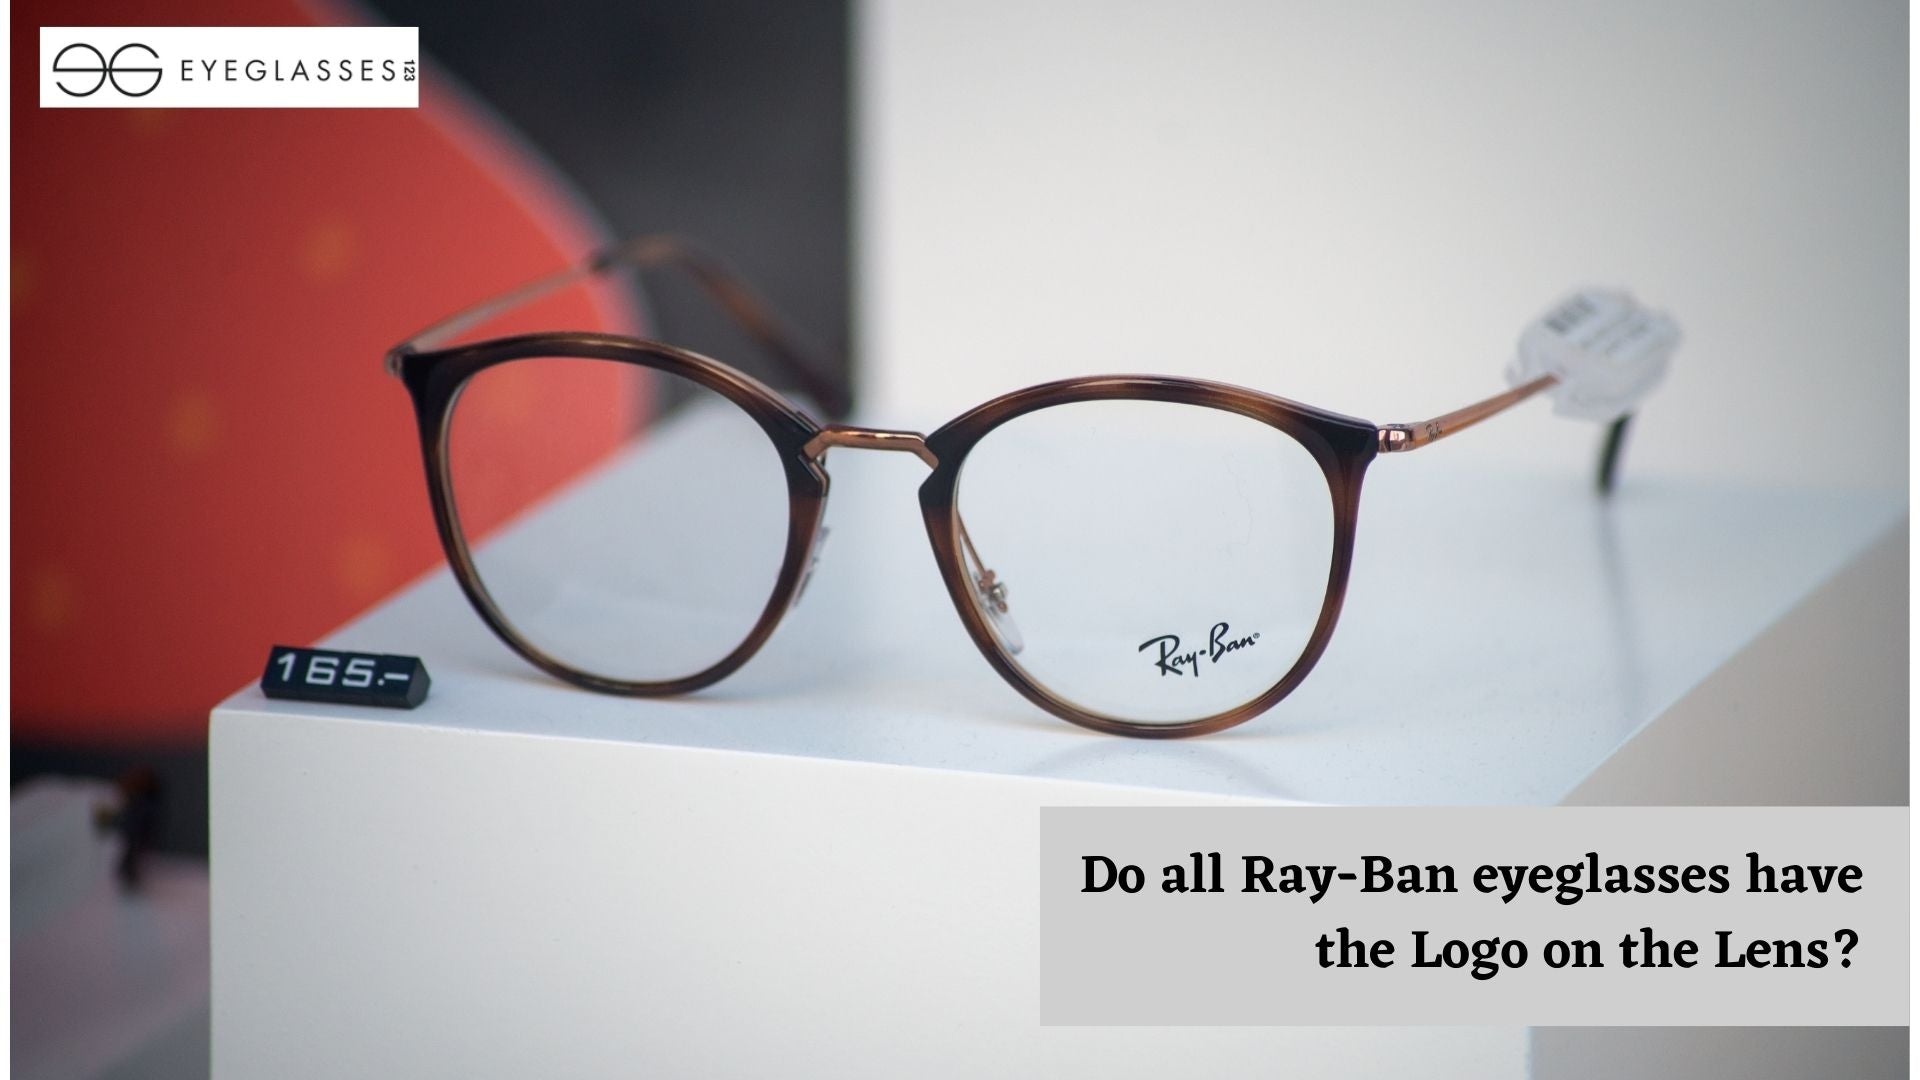 Do all Ray-Ban eyeglasses have the Logo on the Lens?